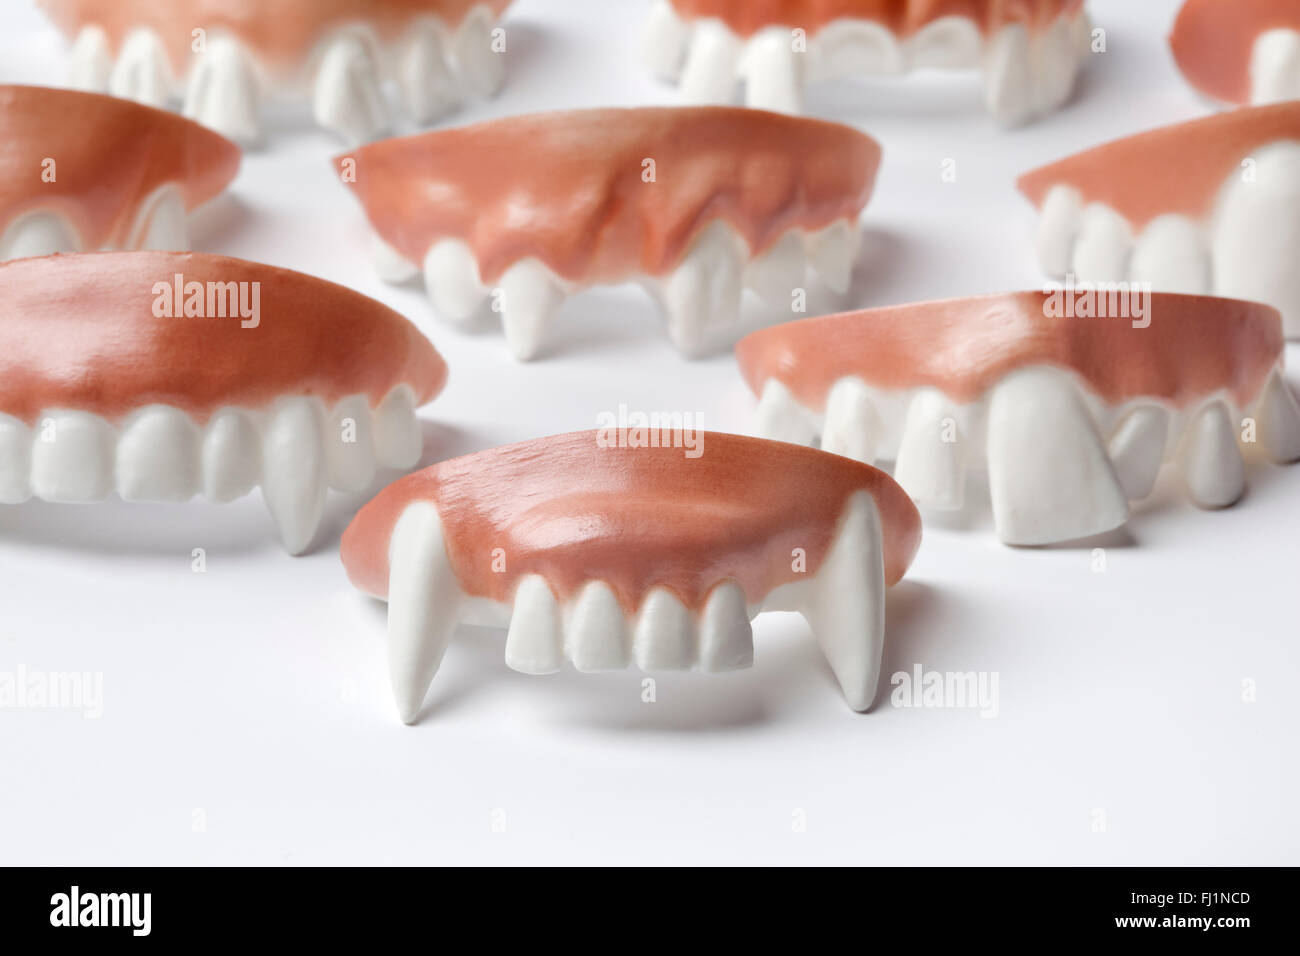 Boy Wearing Fake Vampire Teeth With Fangs High-Res Stock Photo